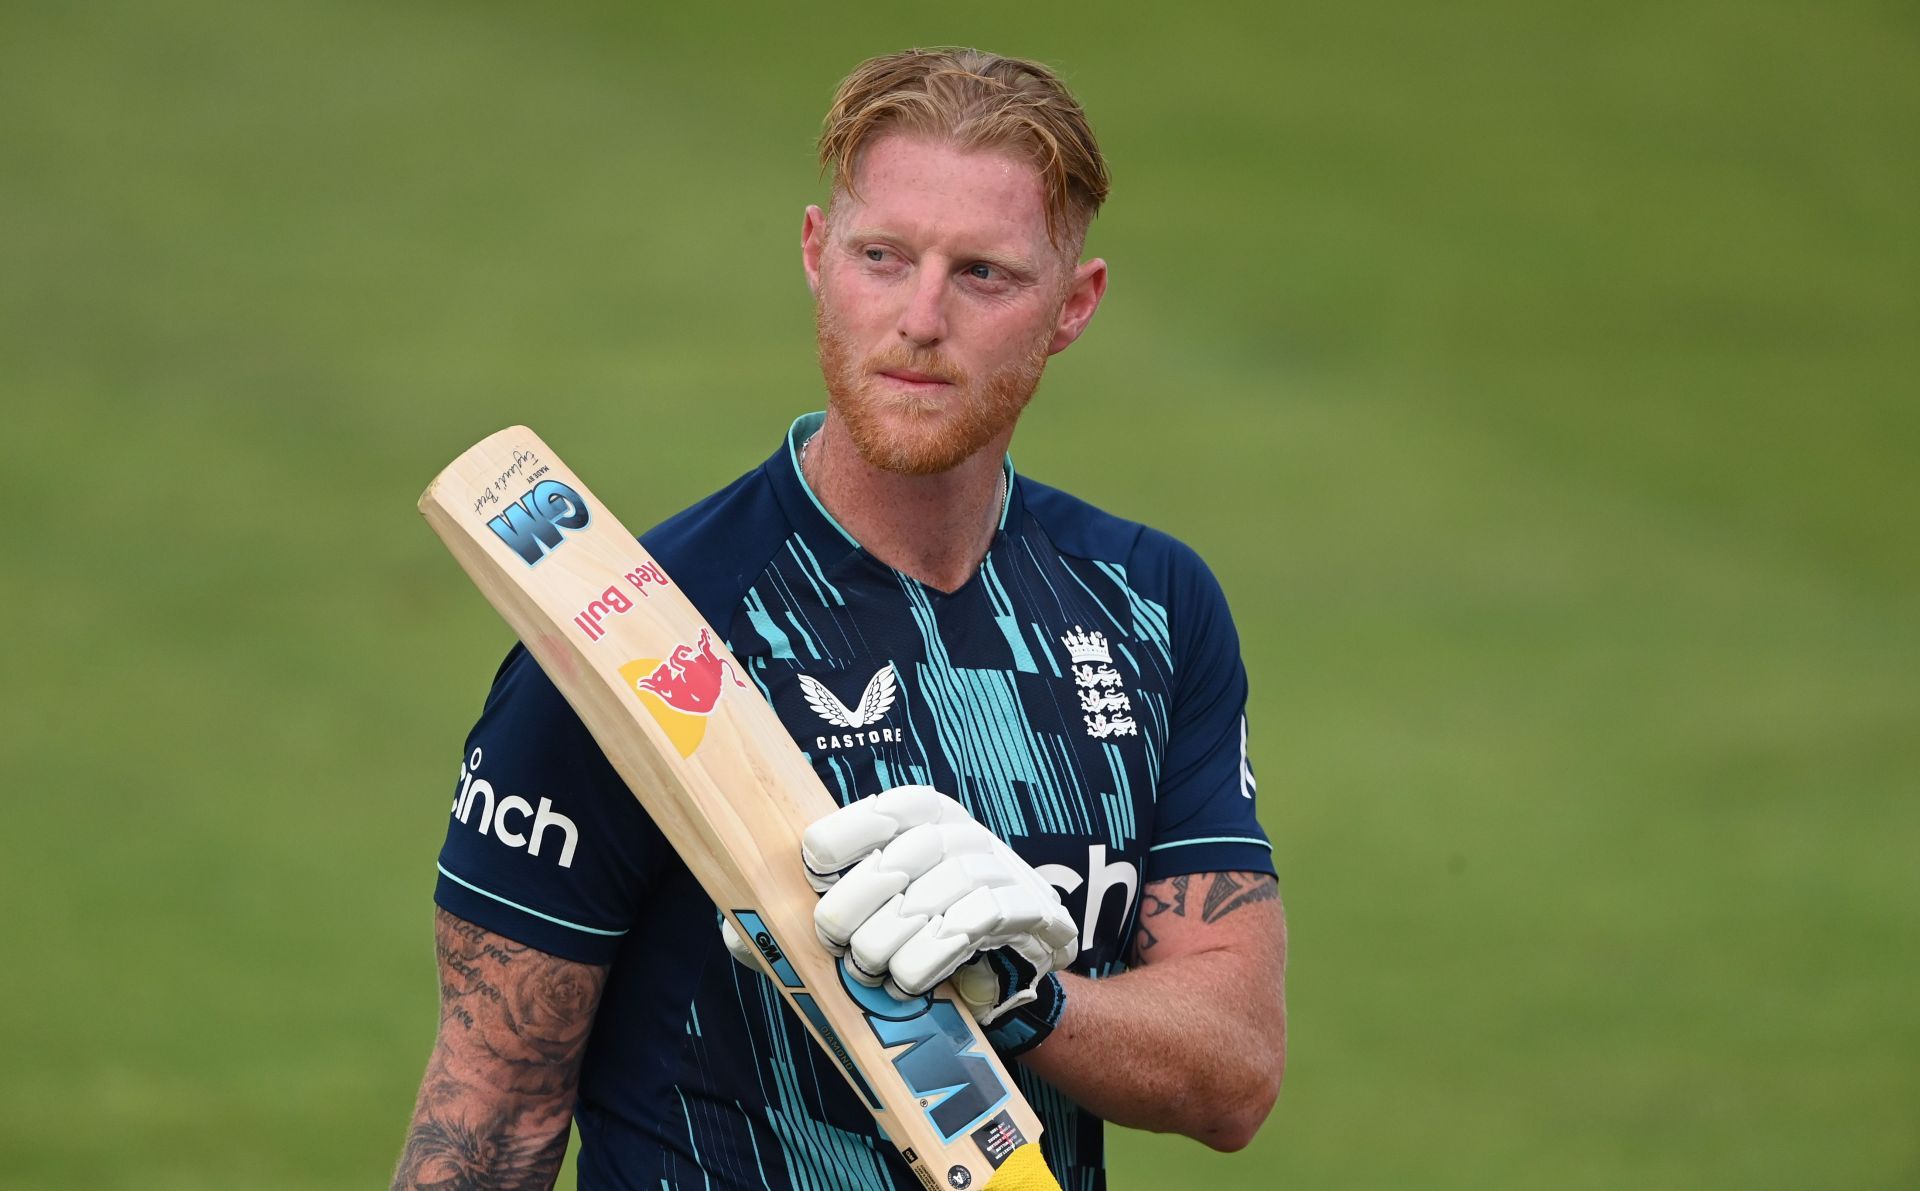 Ben Stokes played his last ODI against South Africa on Tuesday